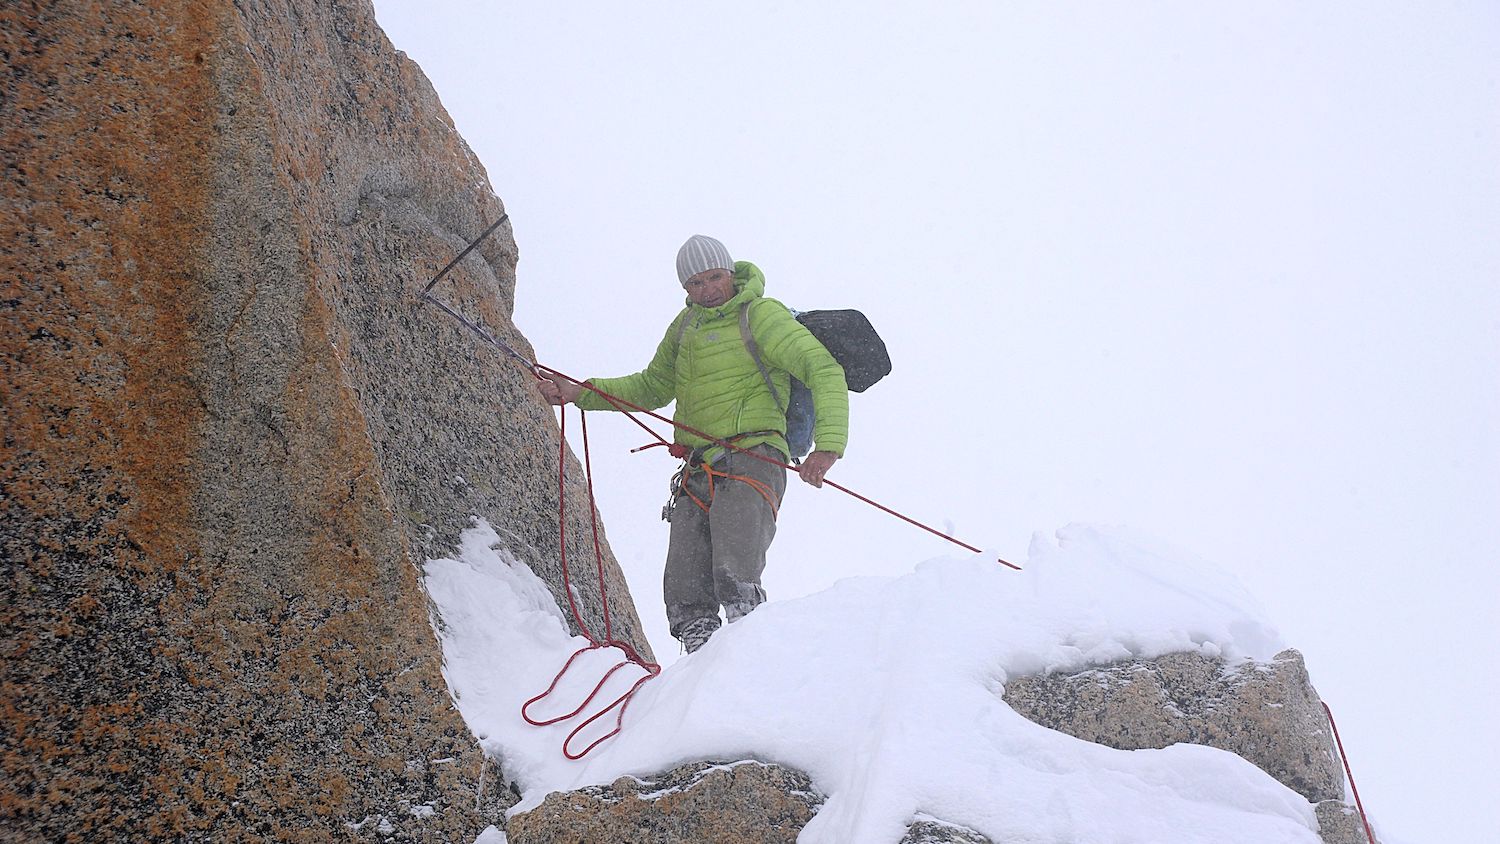 French mountaineer Christophe Profit climbs on the south face of the Rebuffat Peak on the Aiguille du Midi mountain (3 842 m) in the Mont Blanc massif in the French Alps, on June 2, 2016, during the reconstitution of Gaston Rebuffat and Maurice Baquet's first ascent of the south face of the Aiguille du Midi on July 13, 1956. / AFP / JEAN-PIERRE CLATOT (Photo credit should read JEAN-PIERRE CLATOT/AFP via Getty Images)